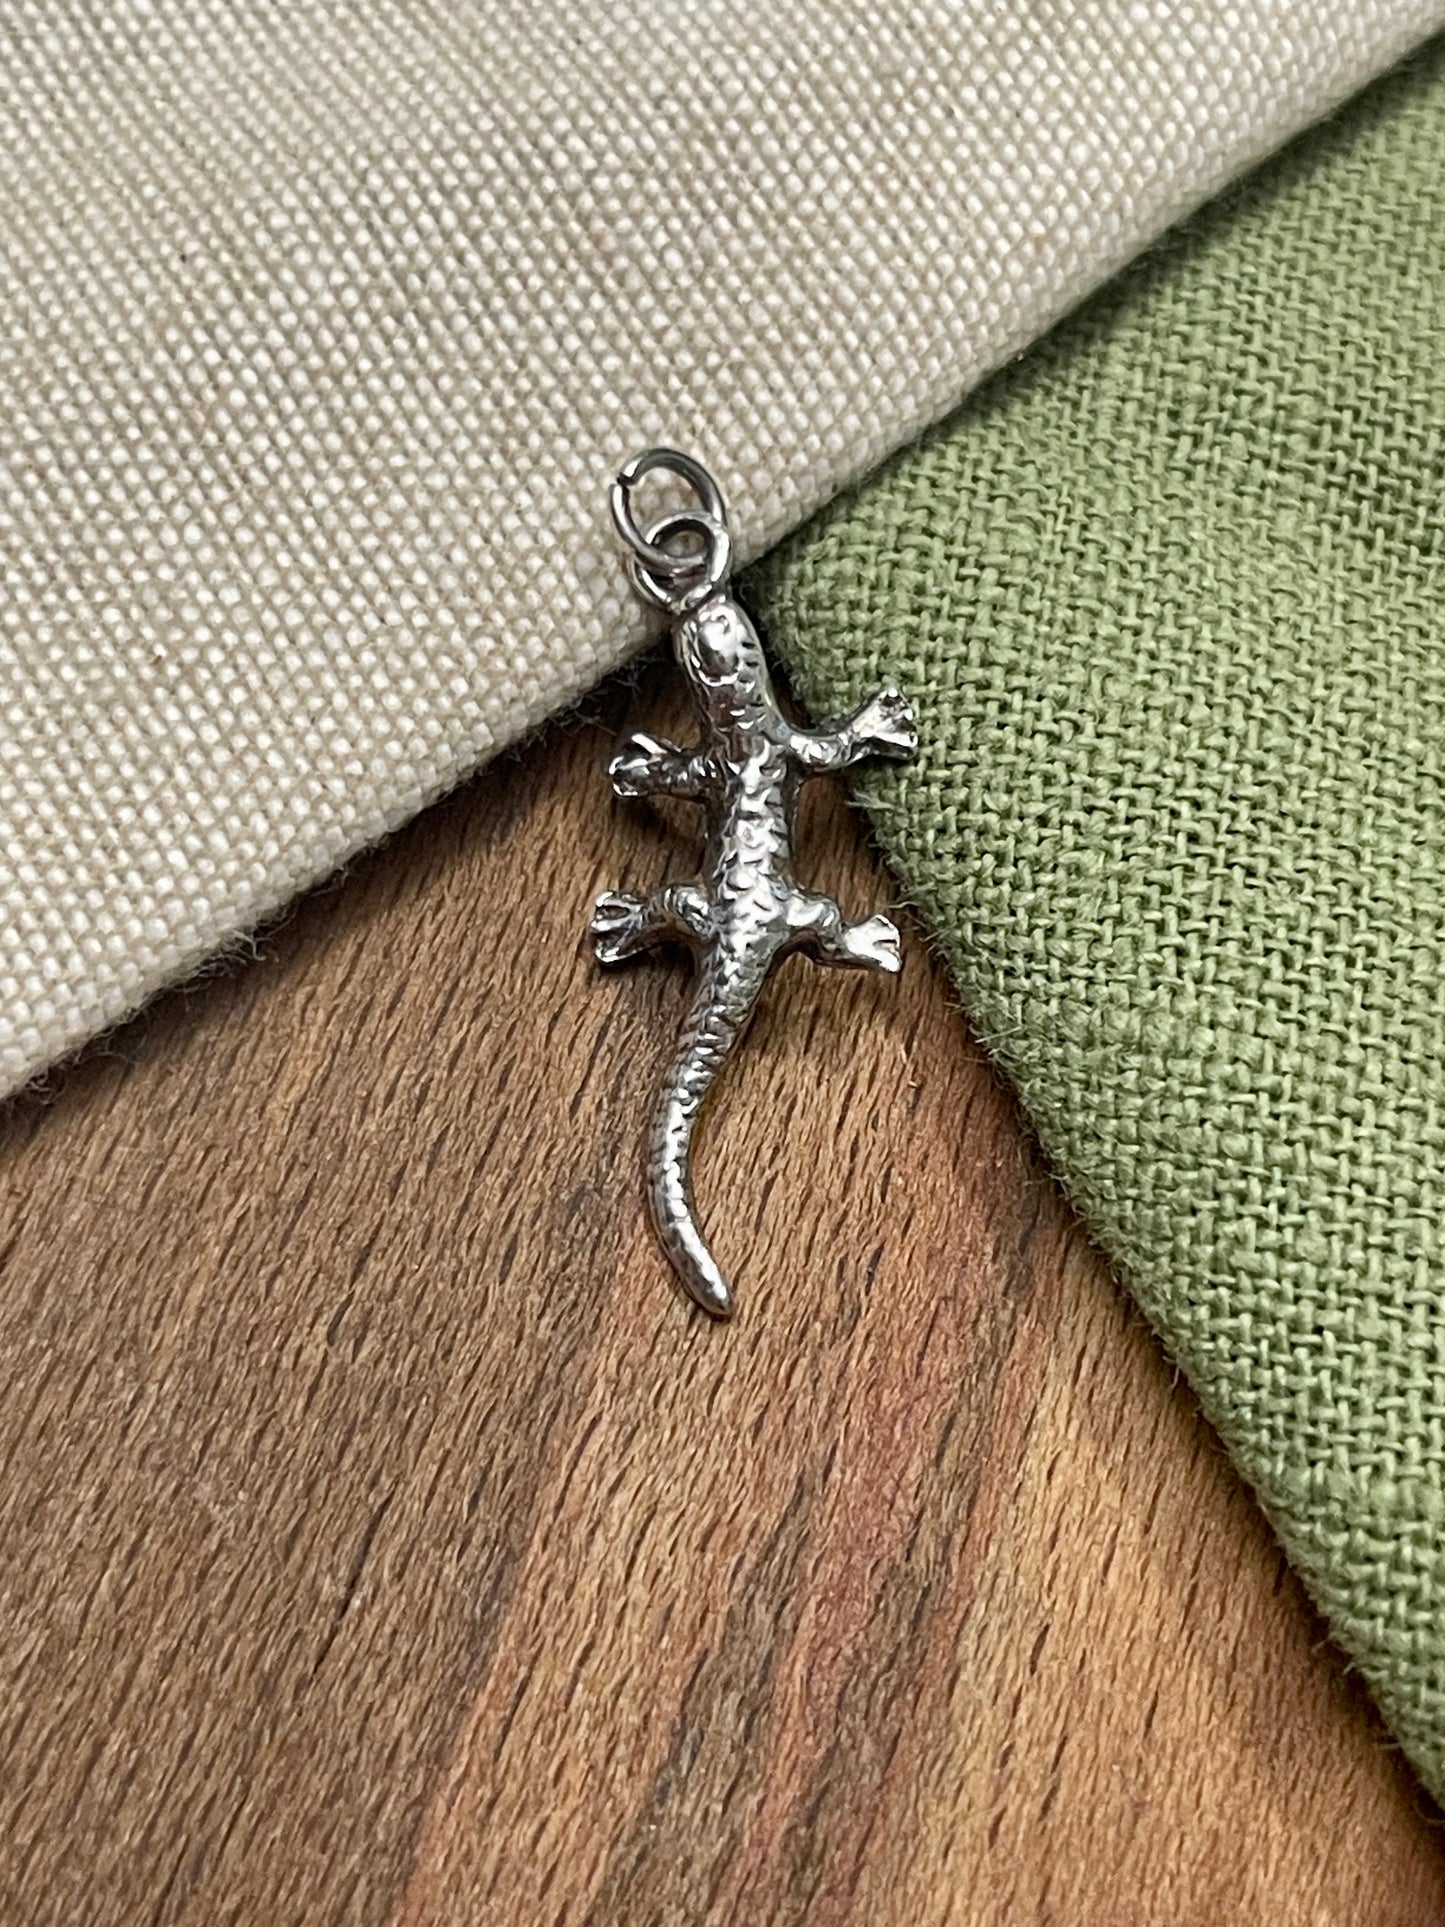 Lizard Gecko Charm Gift Pendent Solid 925 Sterling Silver Vintage Jewelry